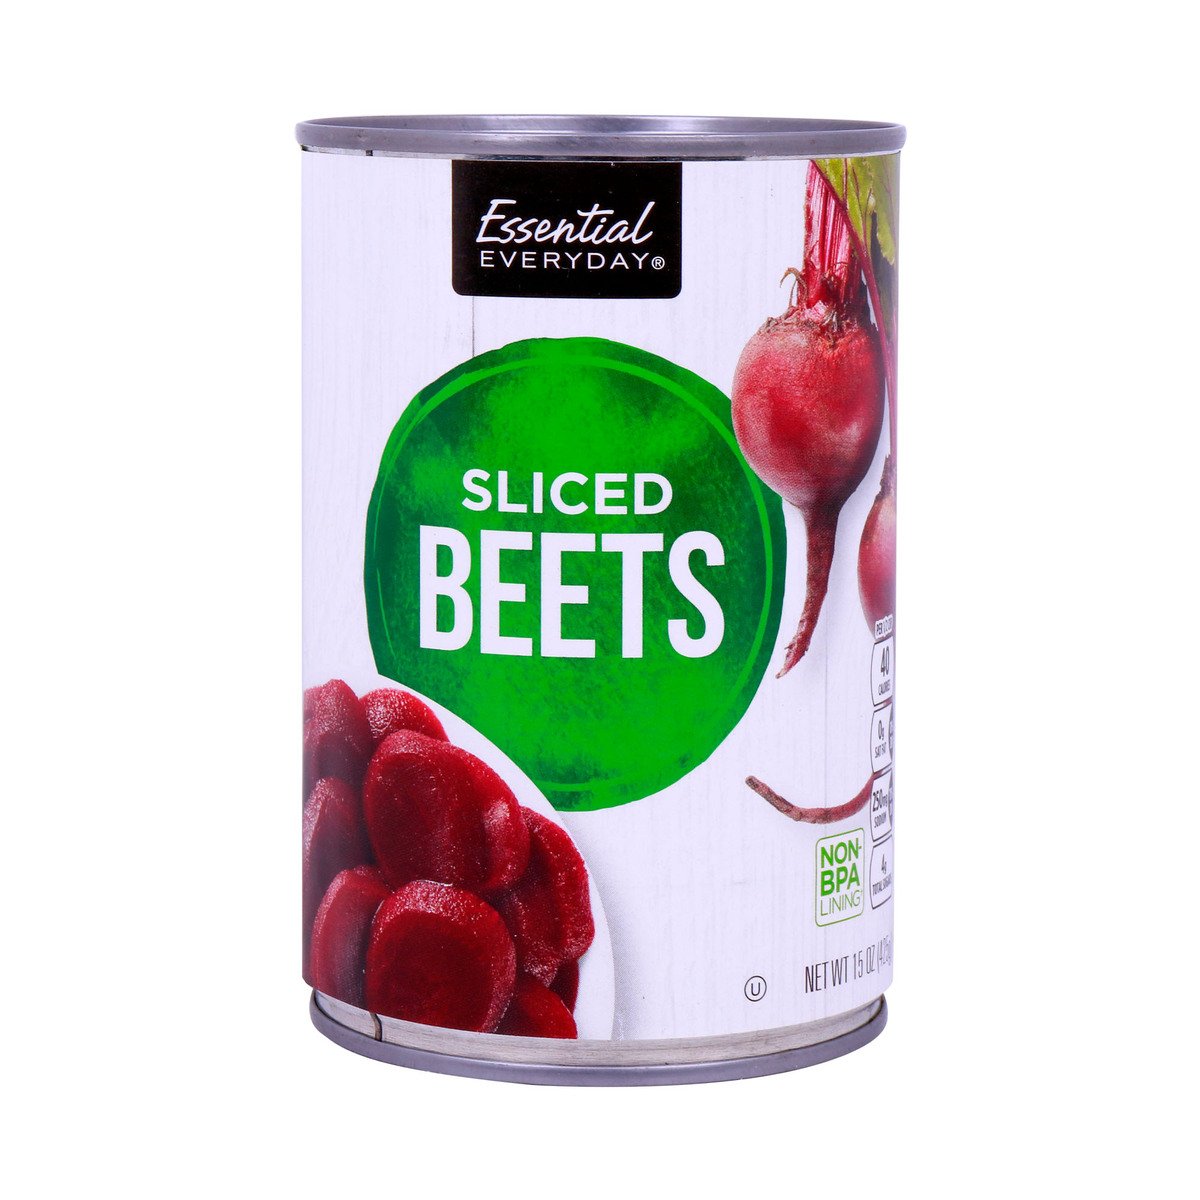 Essential Everyday Sliced Beets 15oz